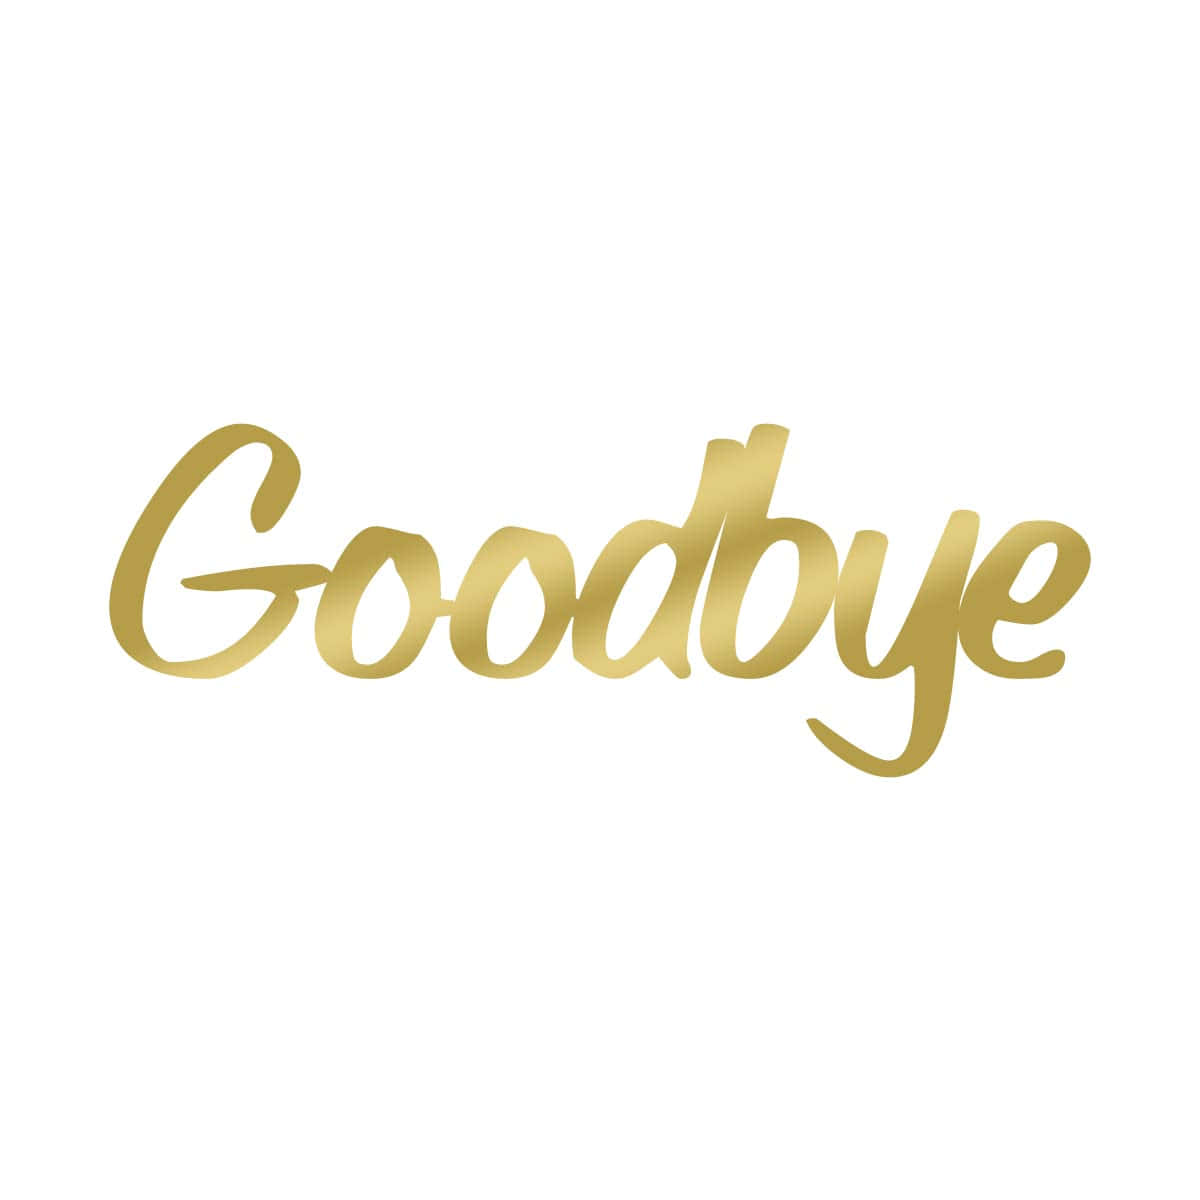 100+] Goodbye Background s | Wallpapers.com